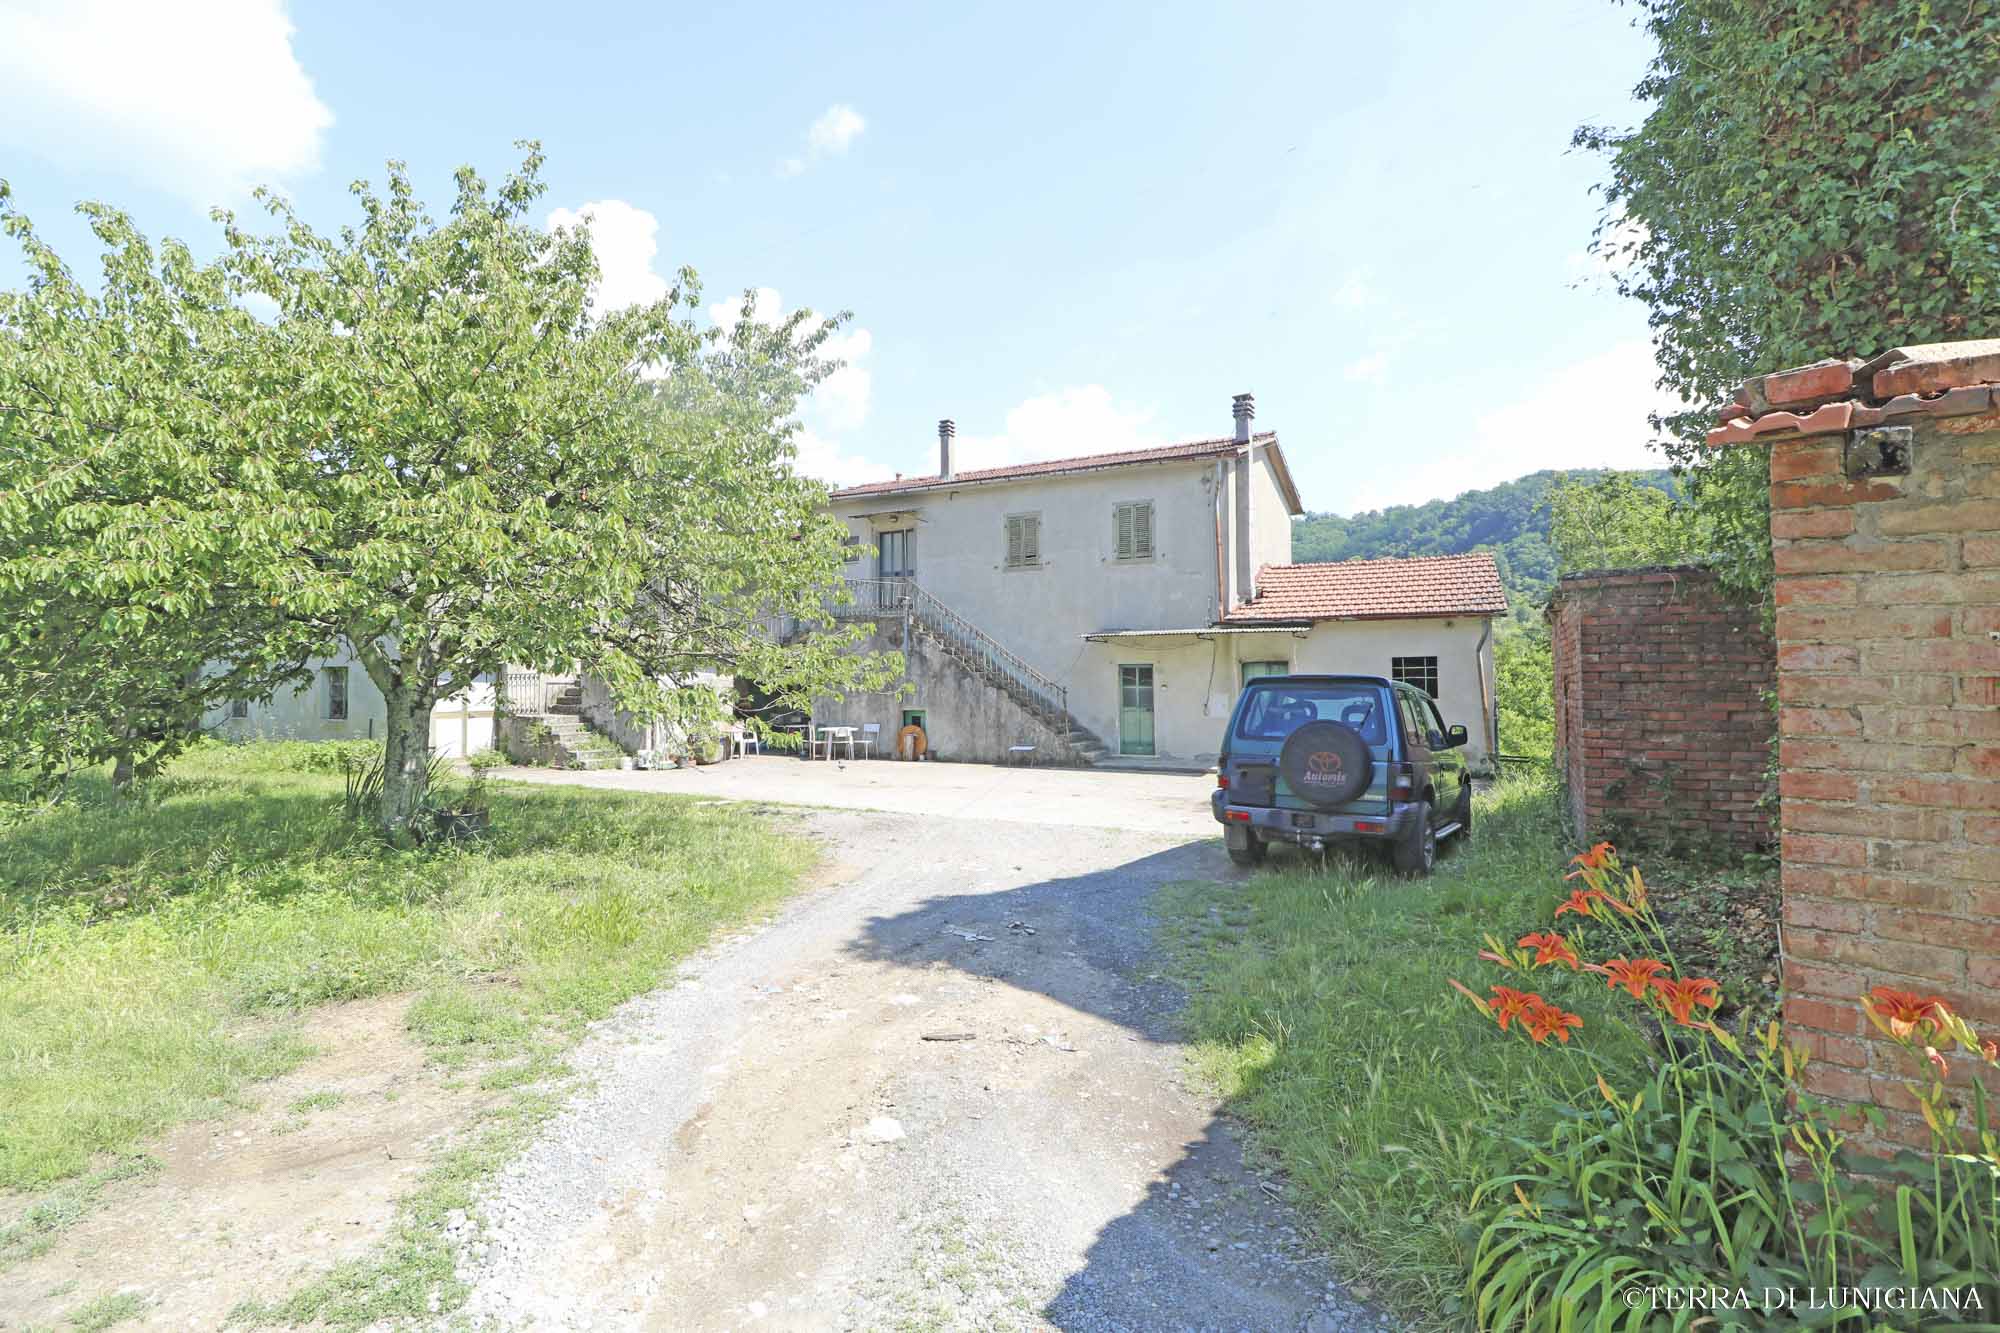 IL GIGLIO – Stone House with Barn and Land